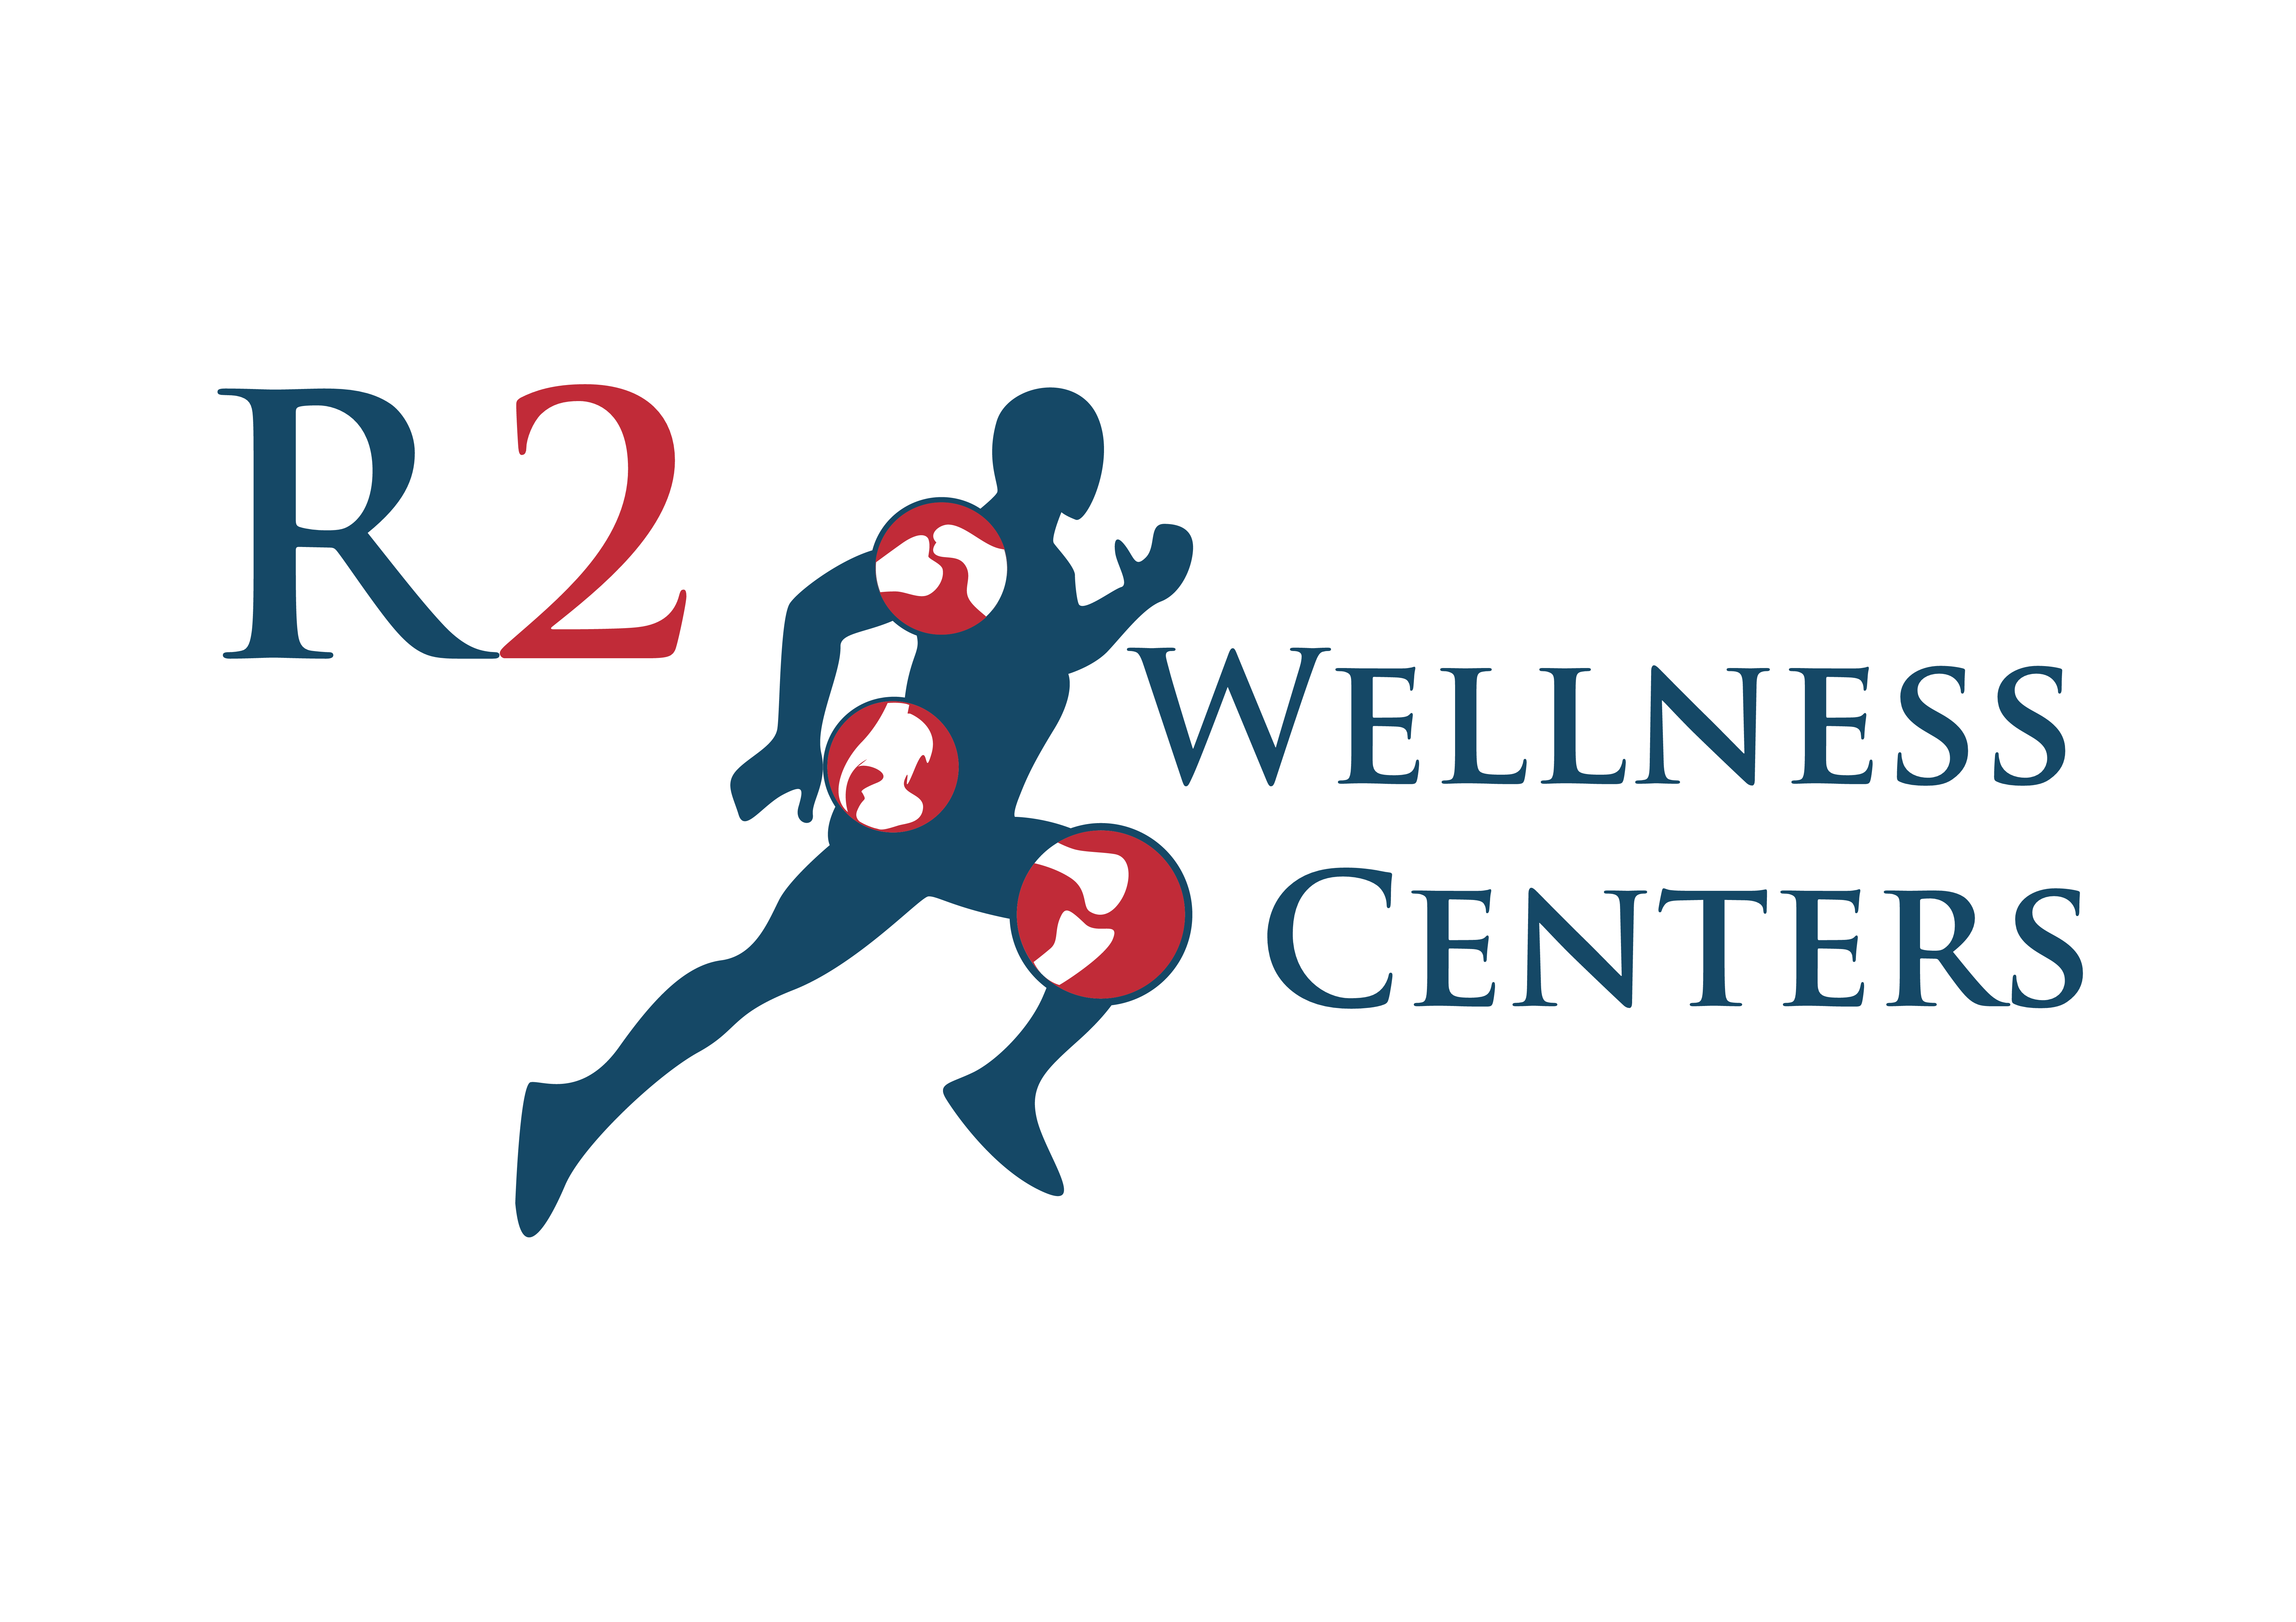 R2 Medical Centers